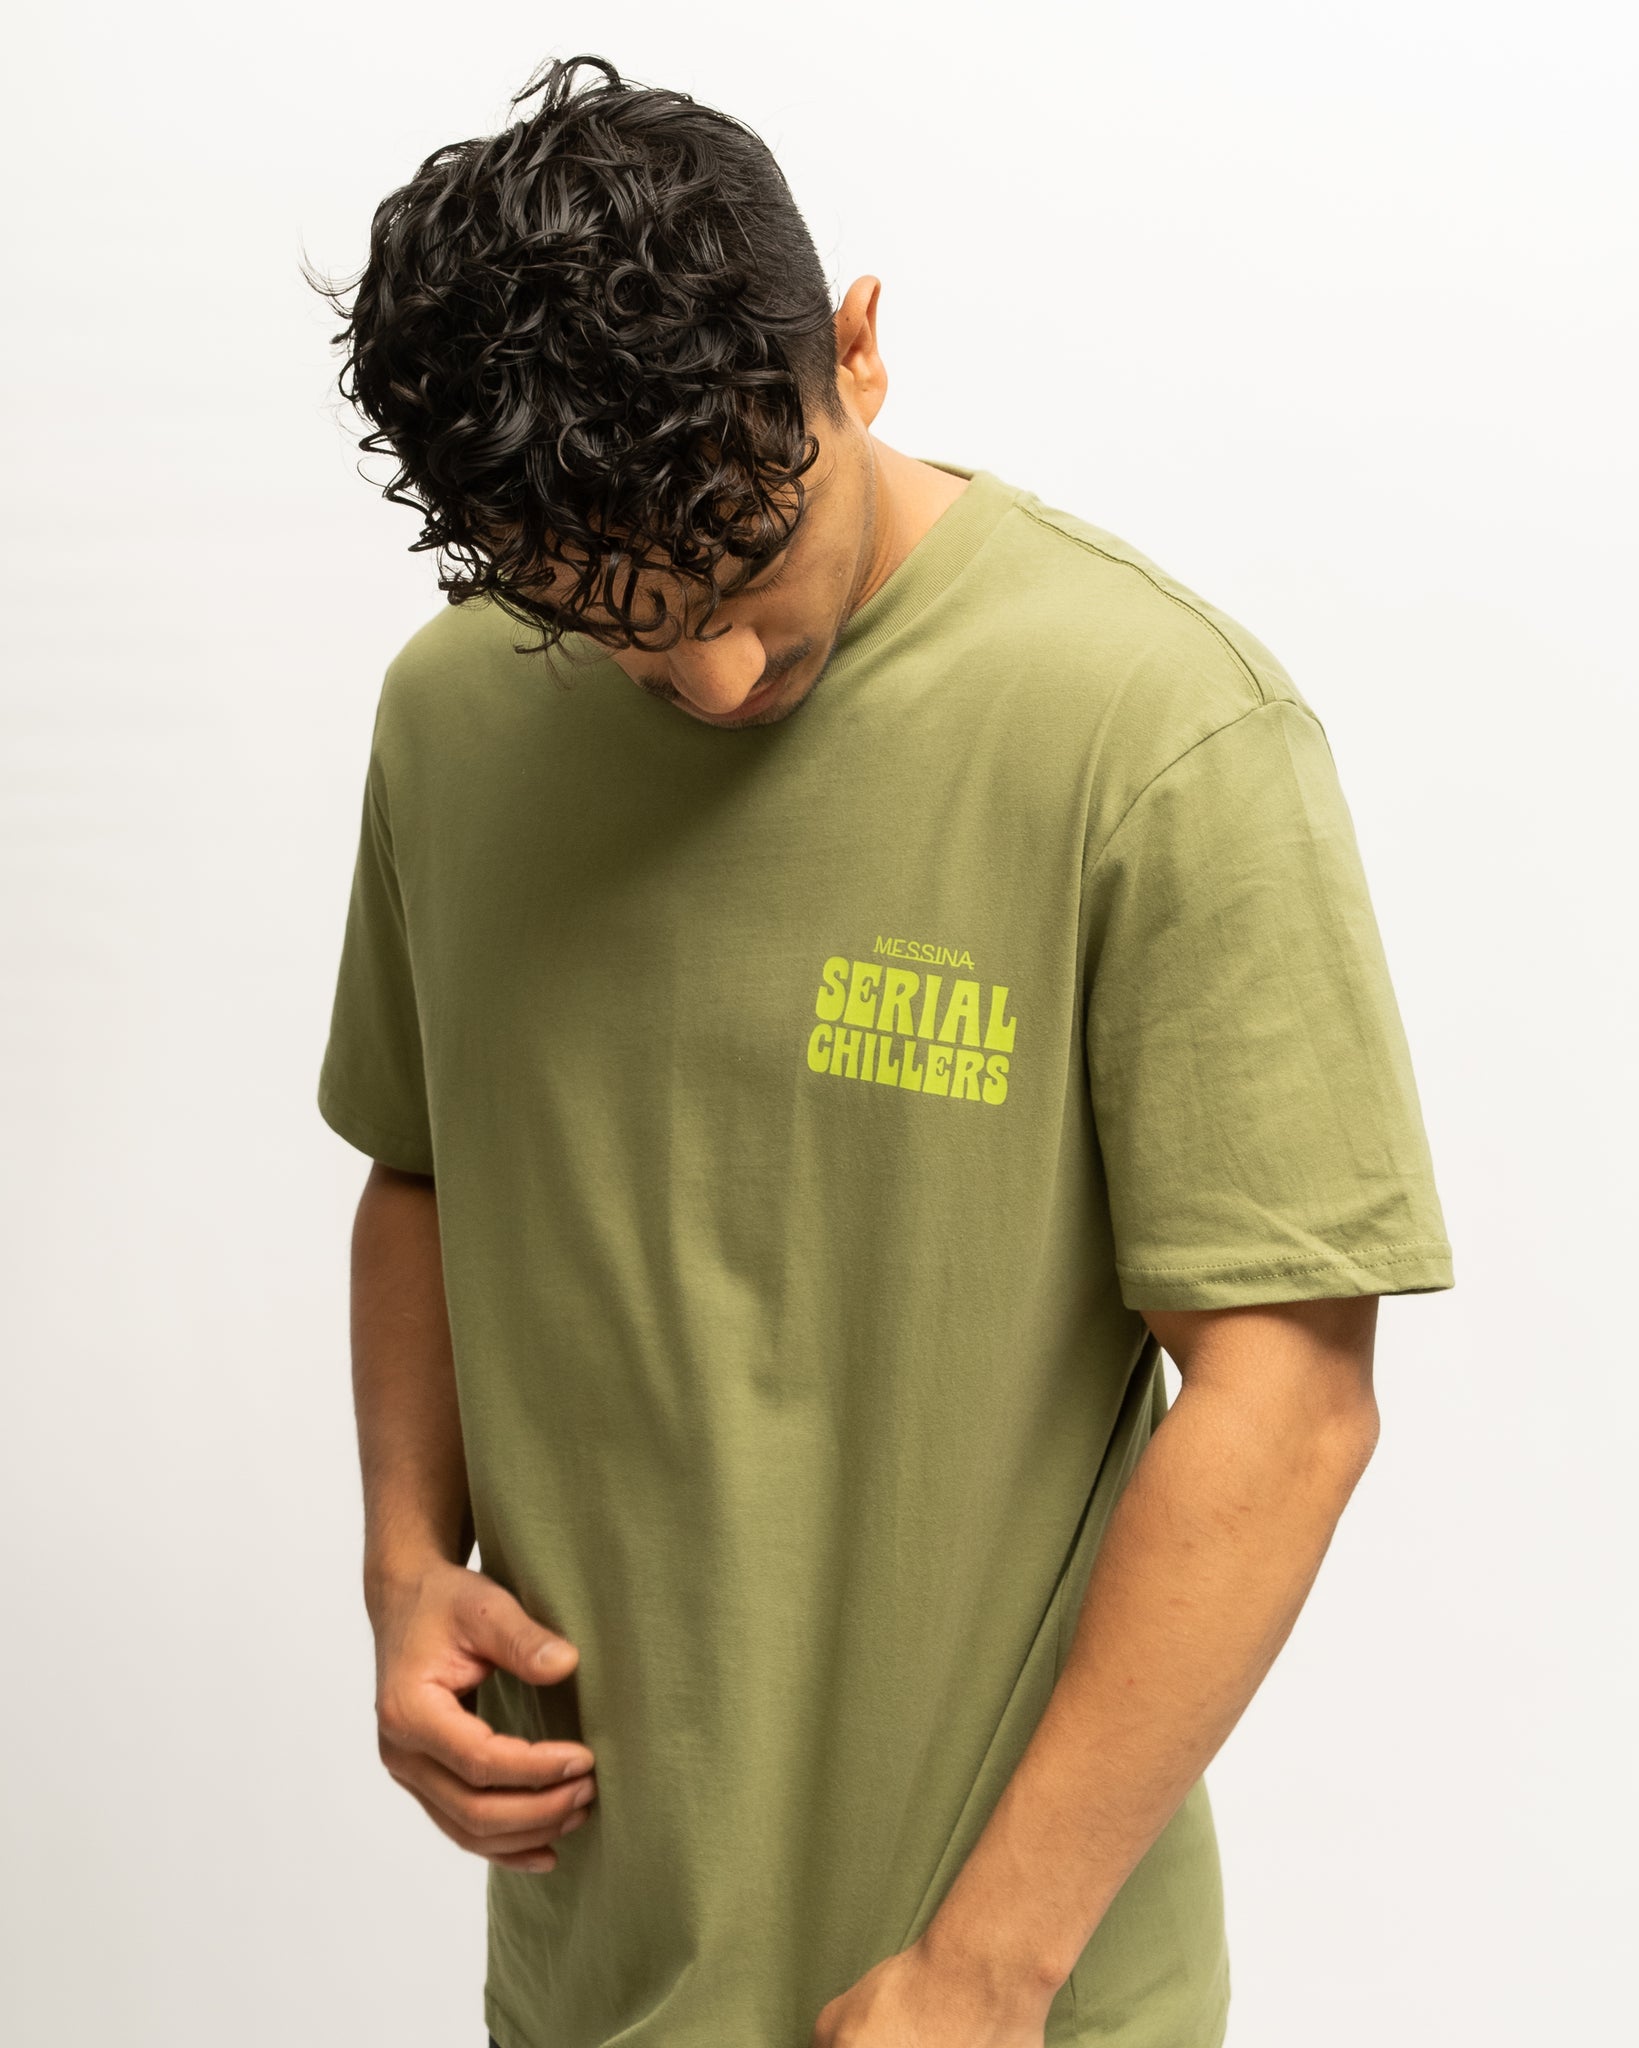 Serial Chillers Tee - Olive